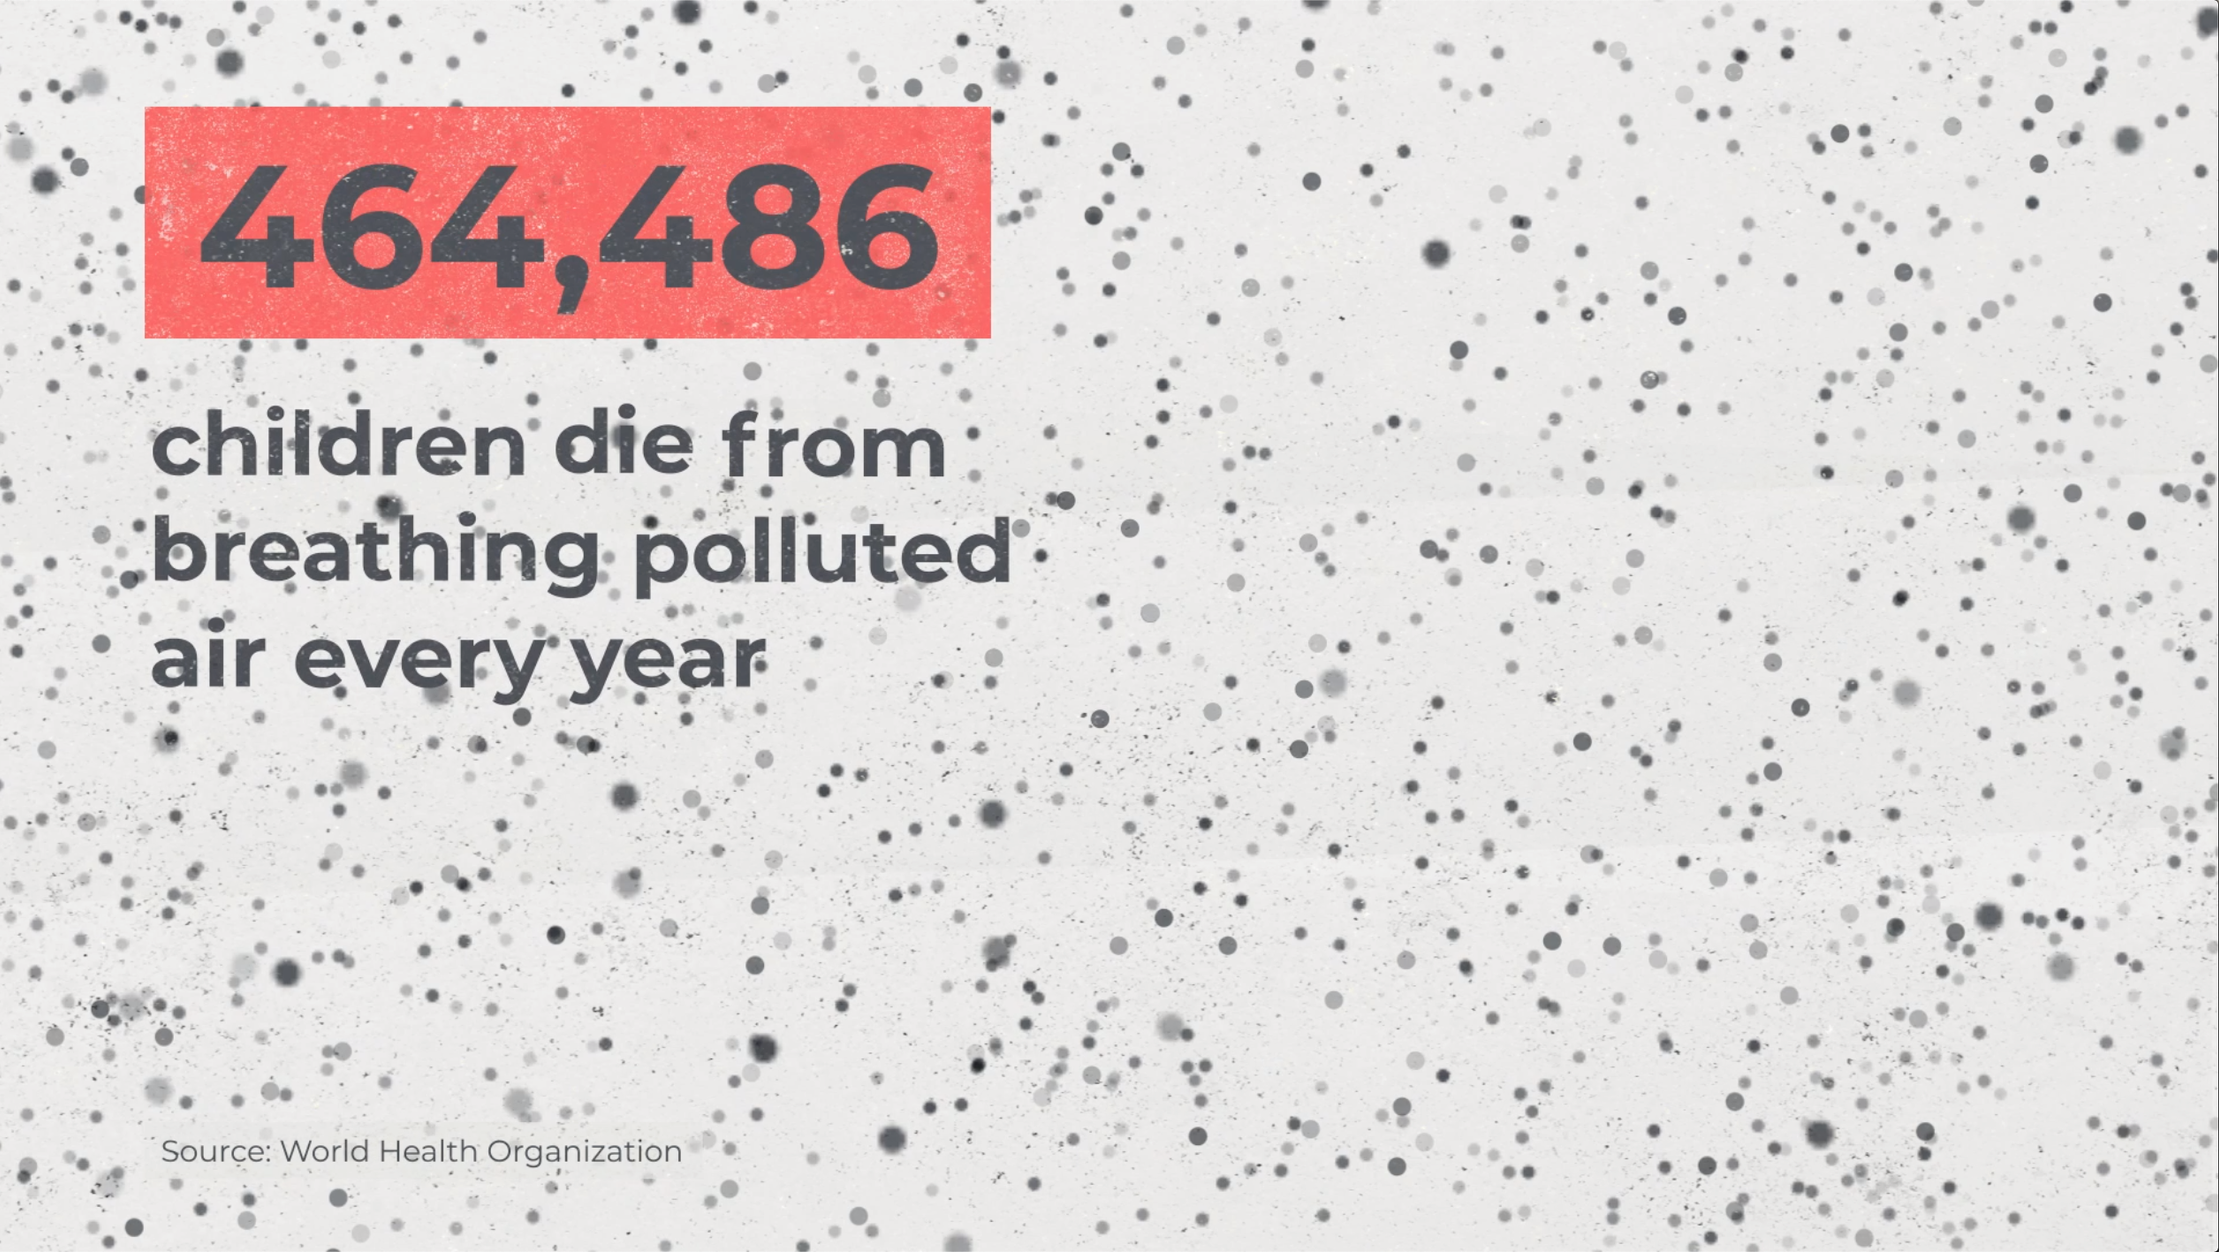 A still from the This is Ella video. It includes a swarm of black particles and text that reads '464,486 children die from breathing polluted air every year'.'